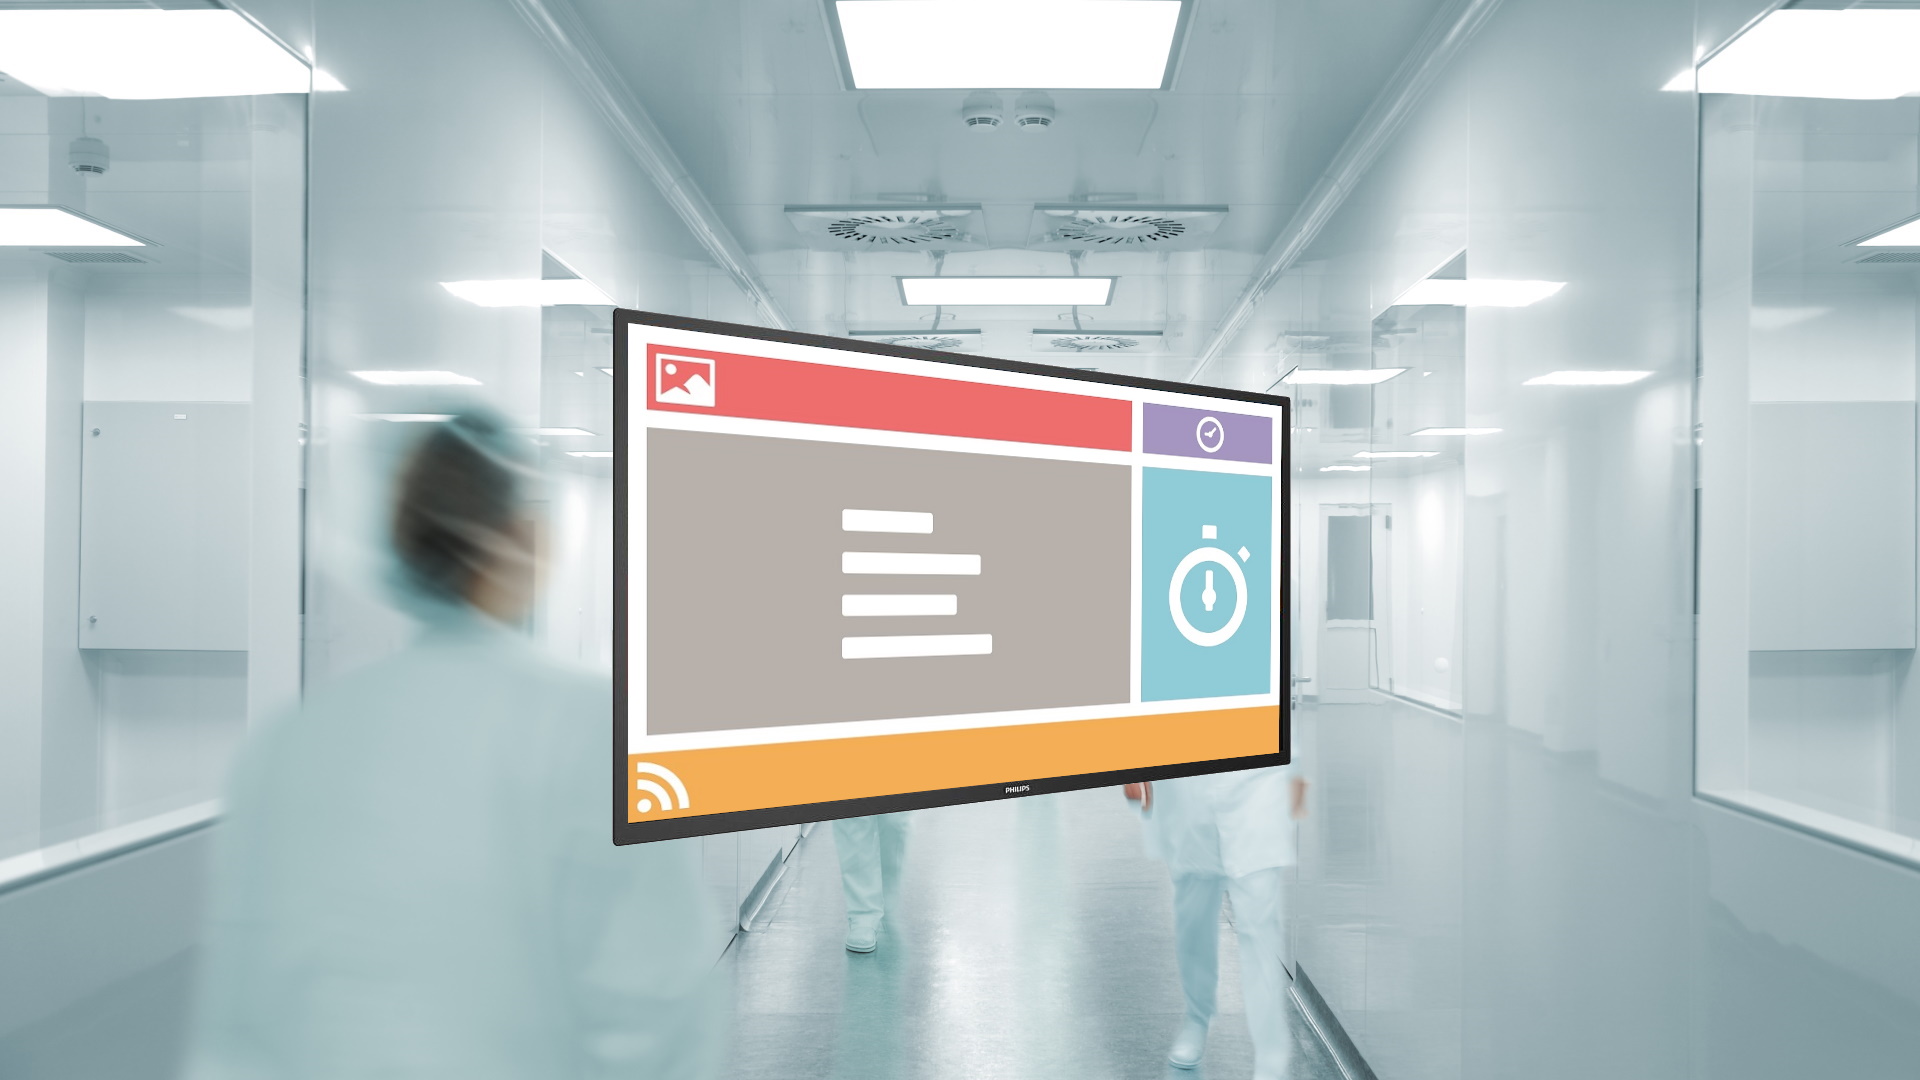 Opensignage for healthcare and hospital